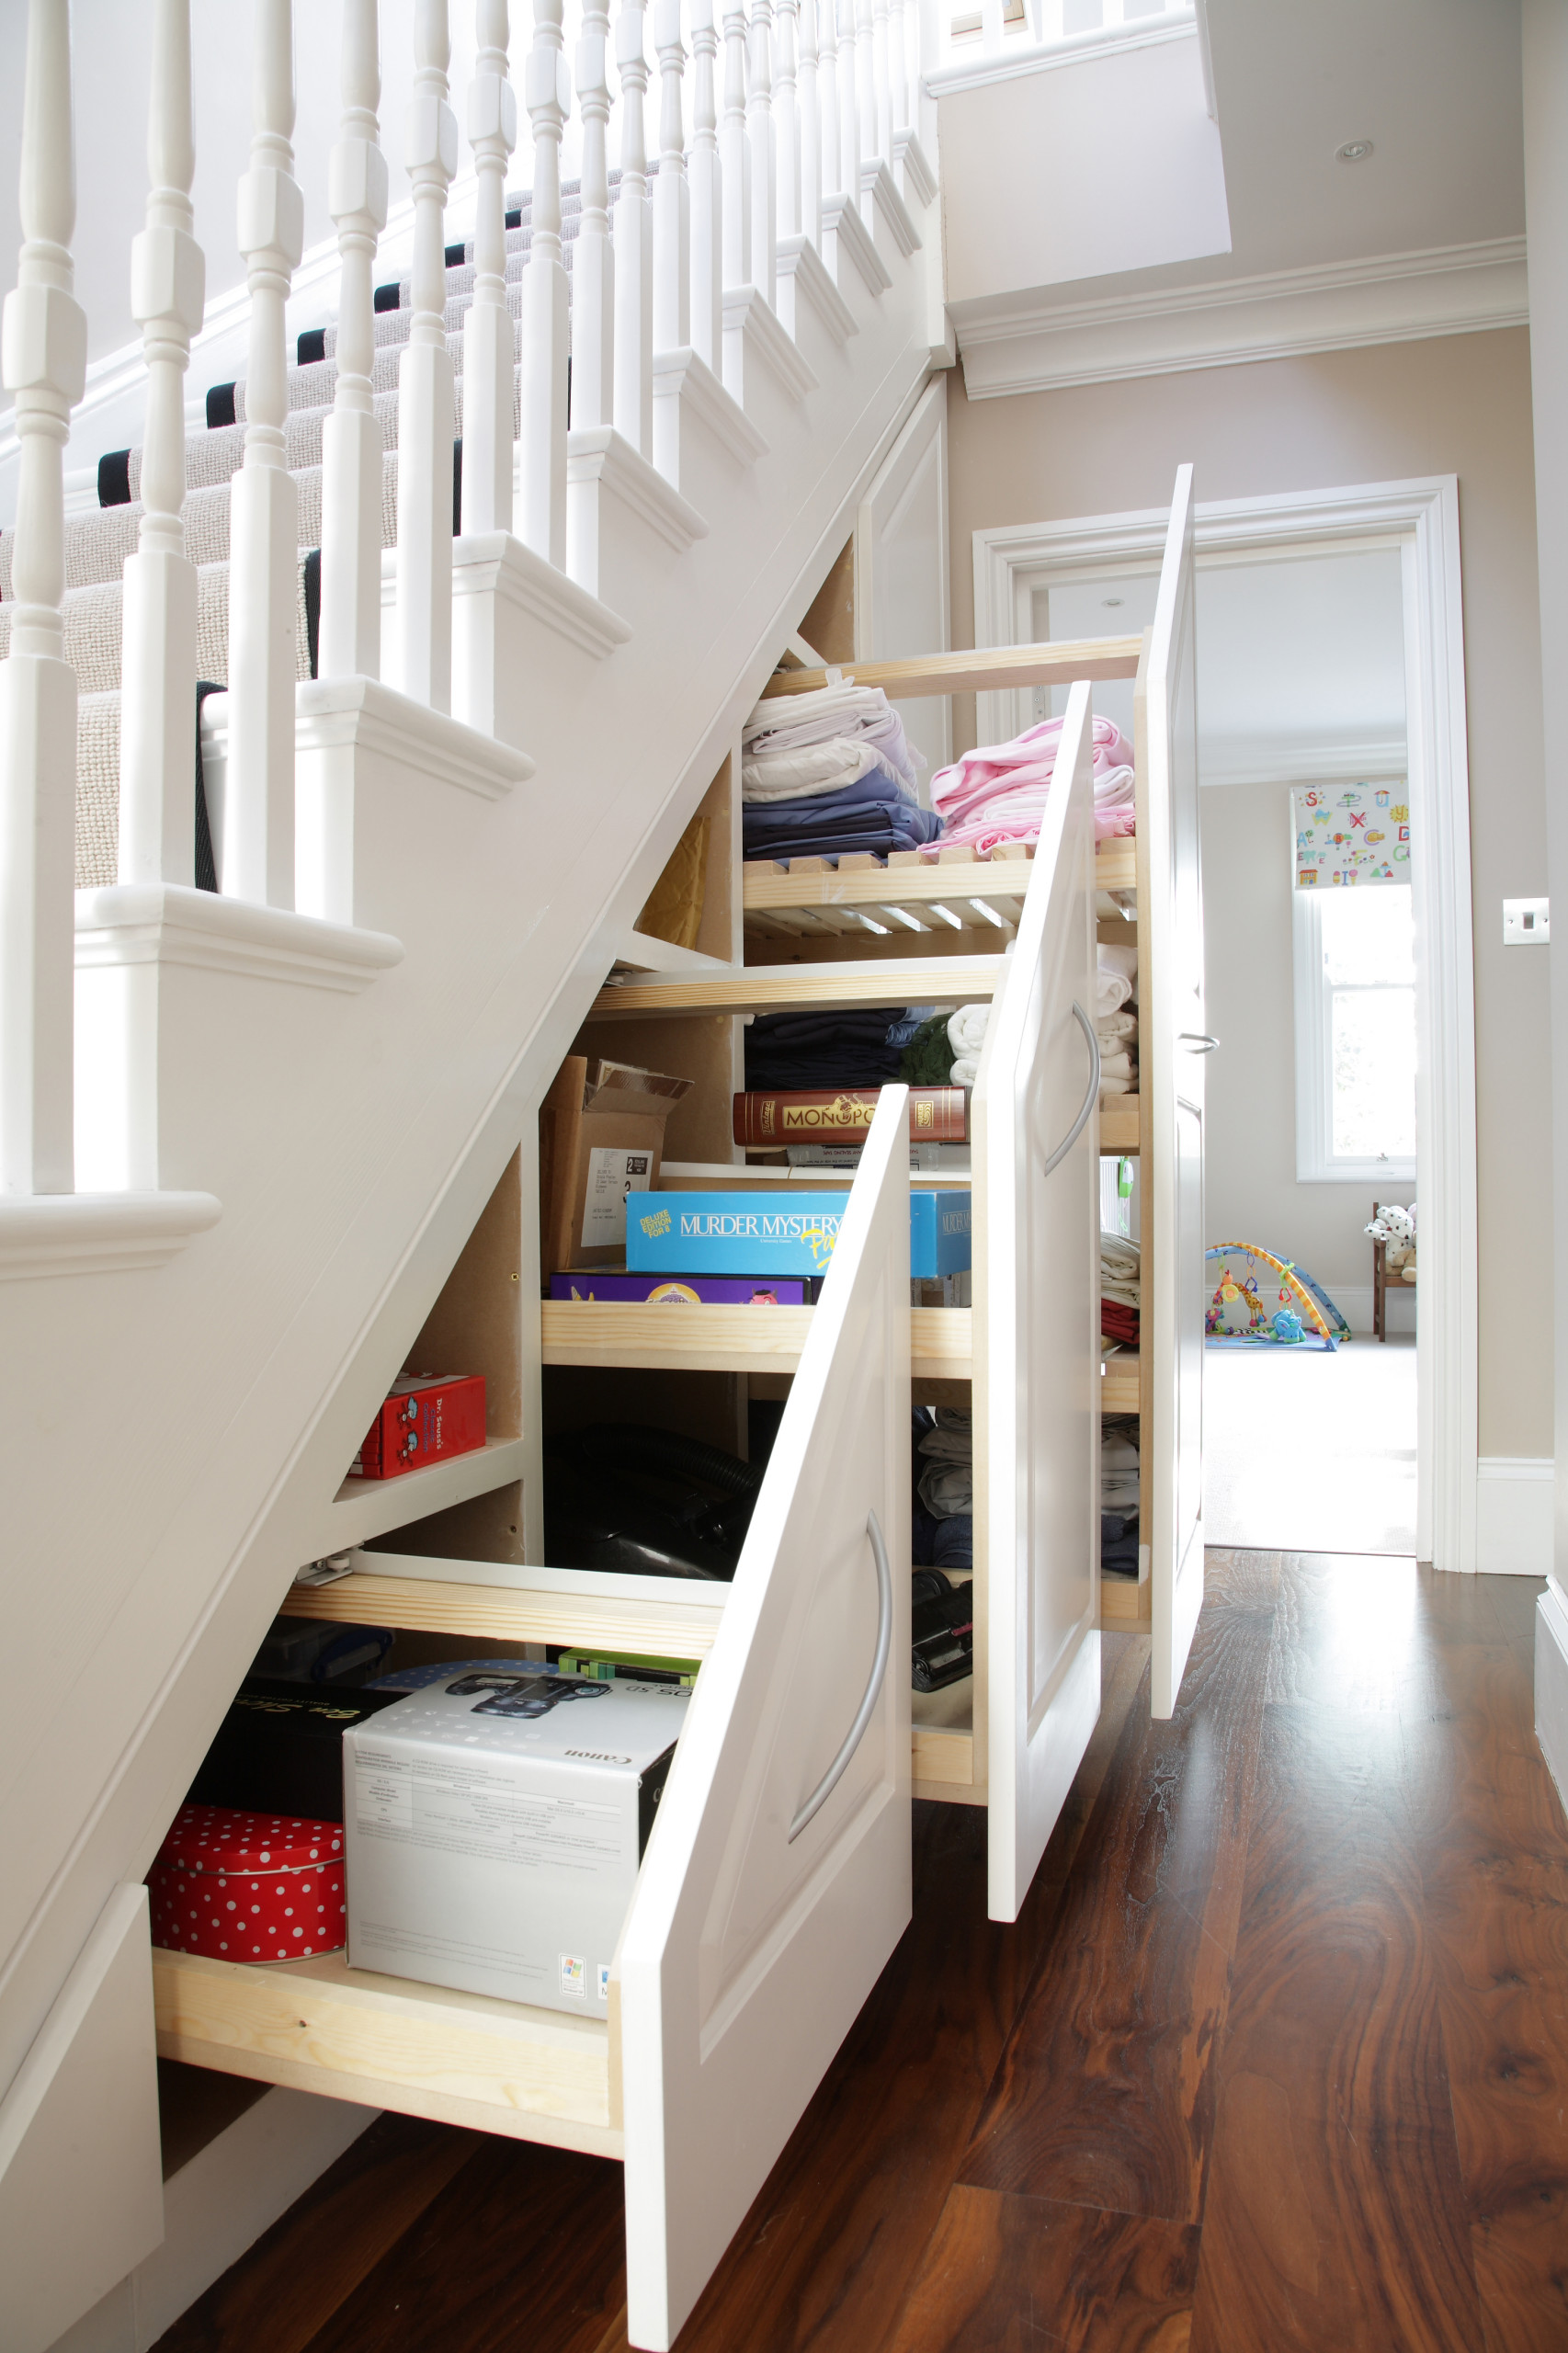 How To Build An Under-the-Stairs Storage Unit (DIY) Family Handyman ...